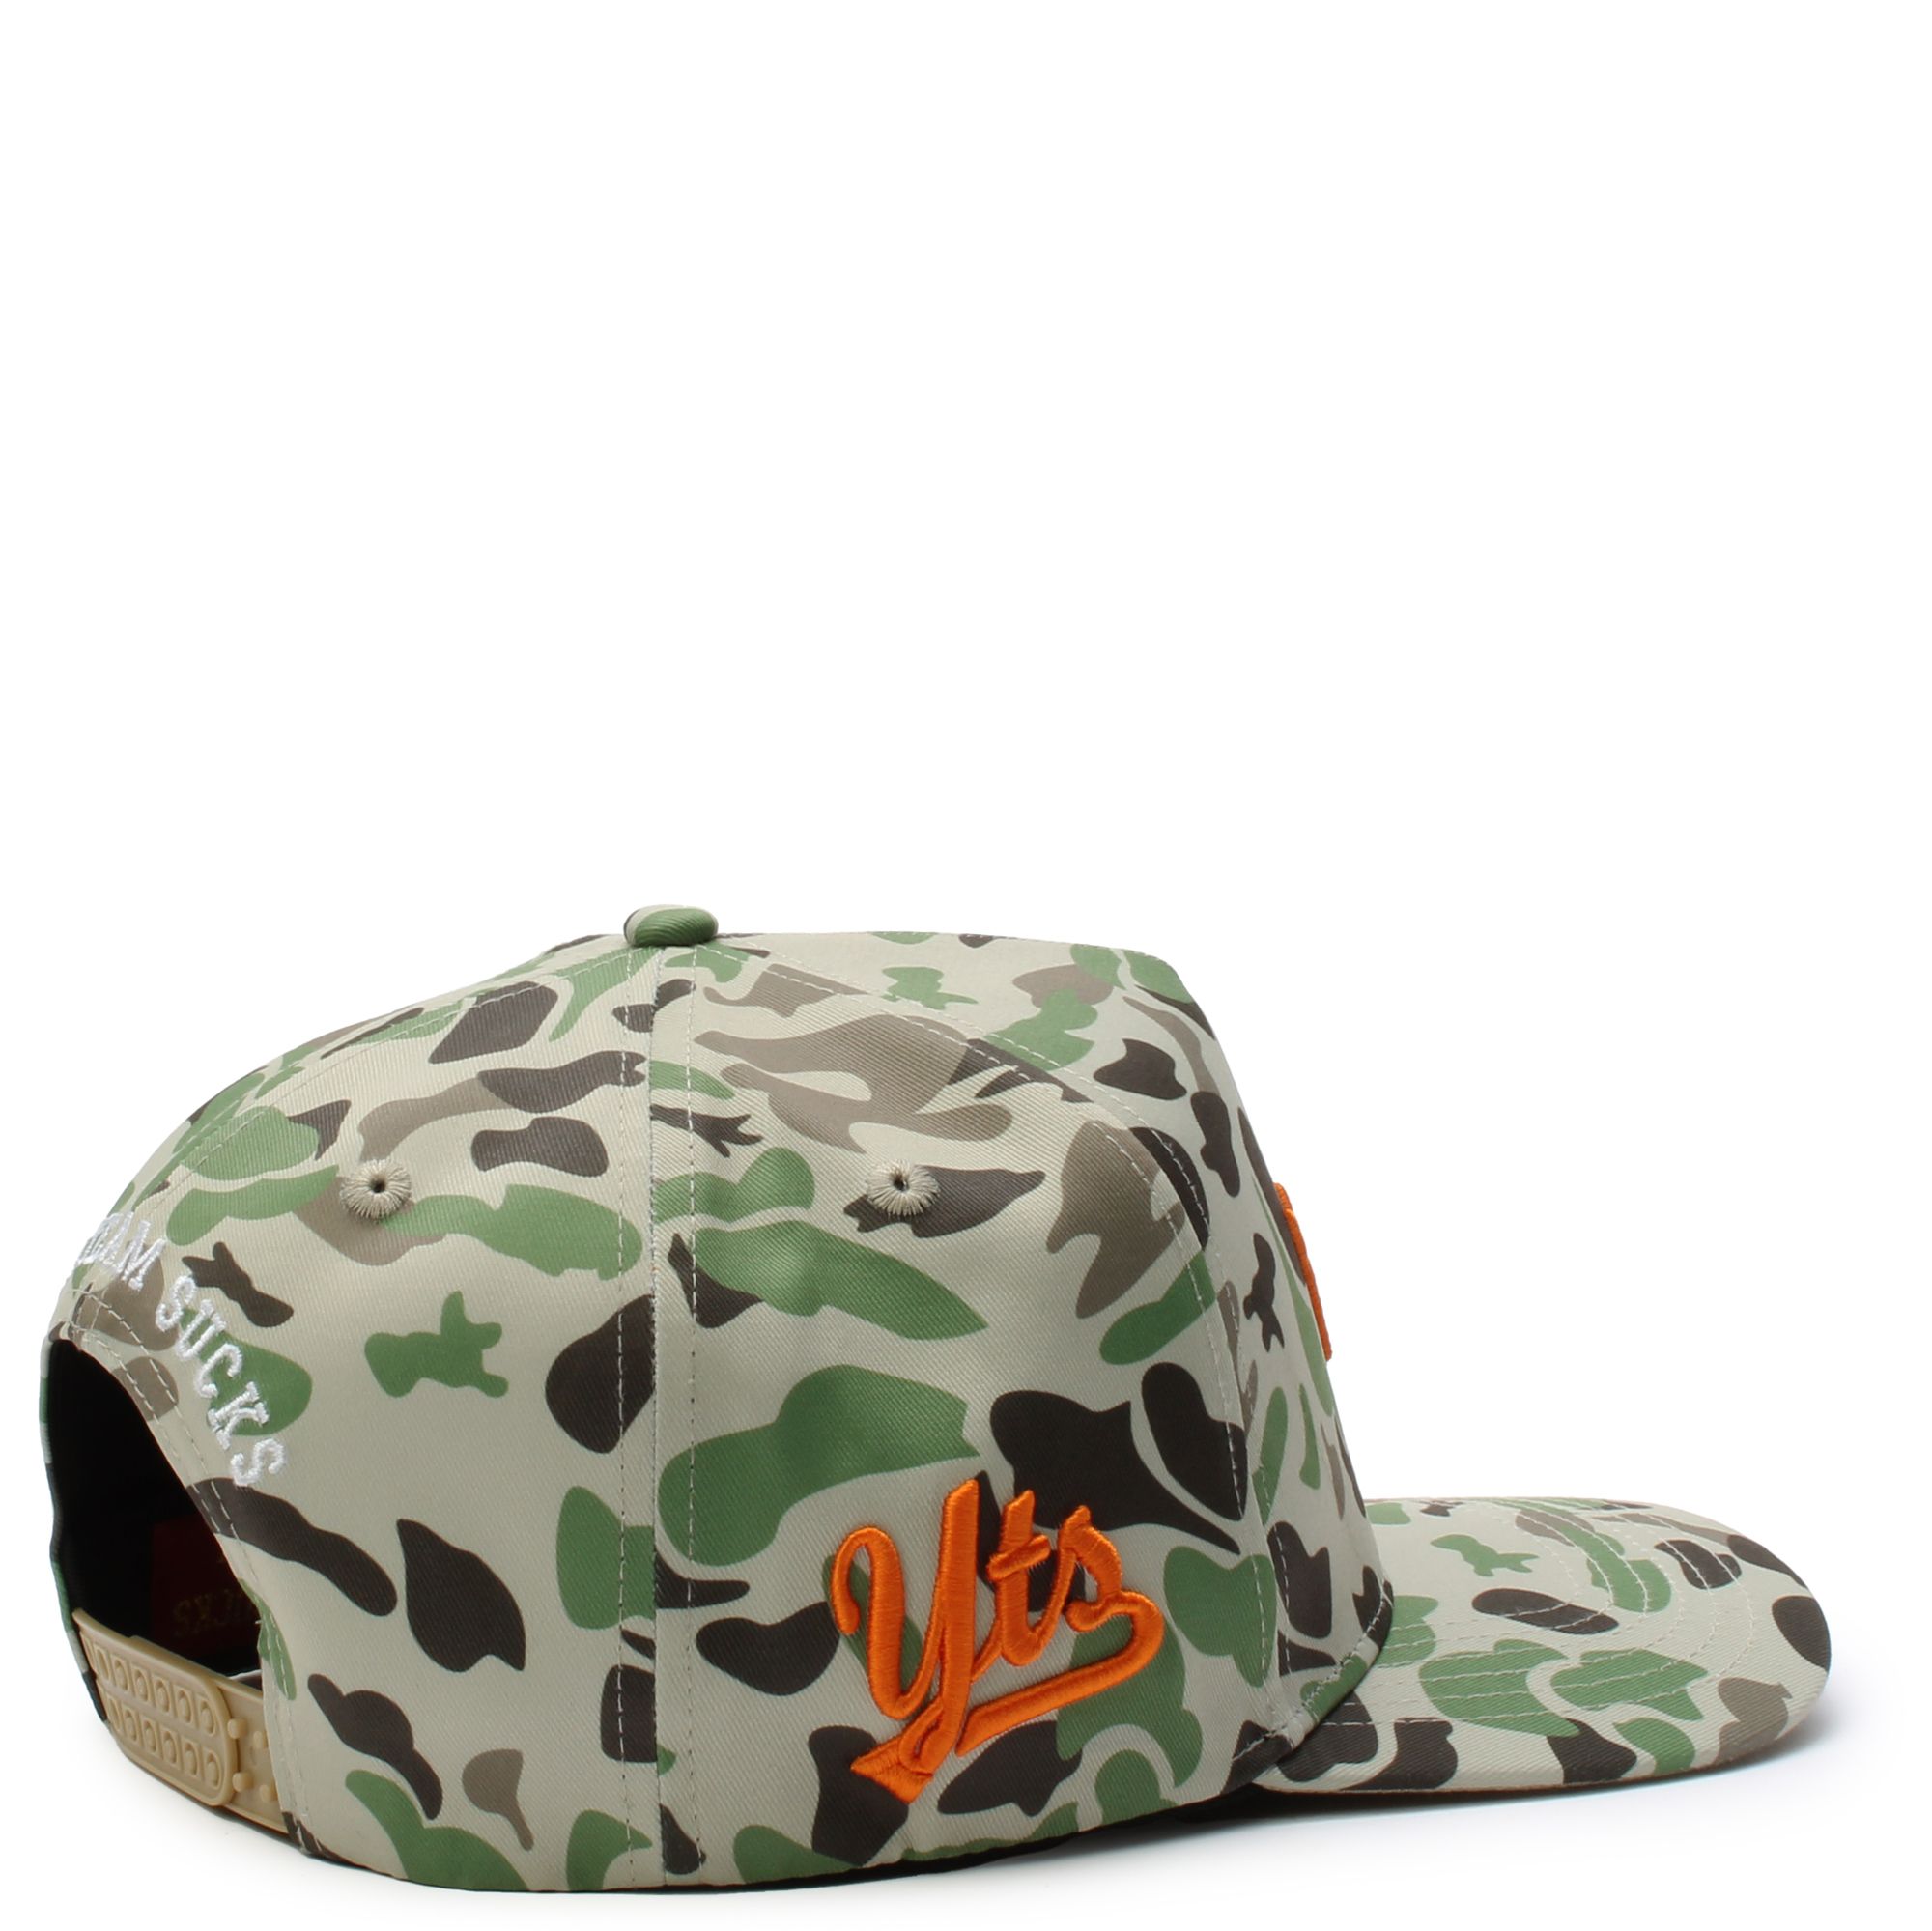 YOUR TEAM SUCKS Bait and Tackle Trucker Hat YTS893-CAMO - Shiekh